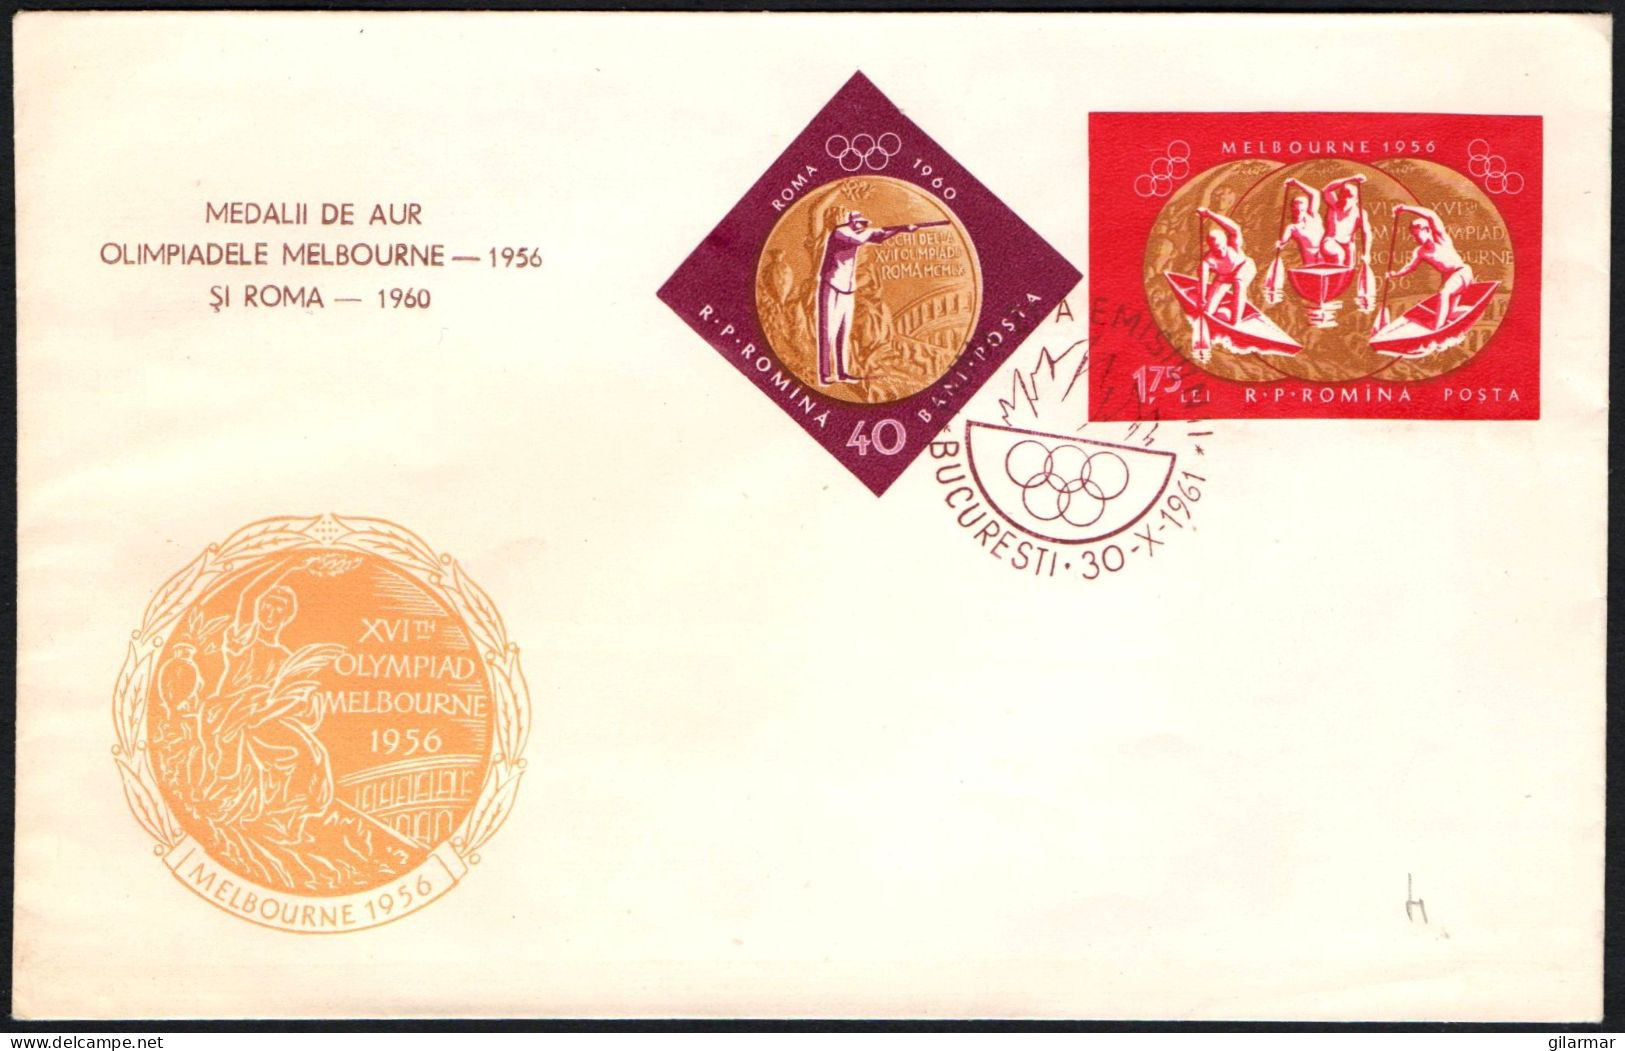 ROMANIA BUCHAREST 1961 - GOLD MEDALS AT OLYMPIC GAMES MELBOURNE '56 & ROME '60 - FDC - CANOE / SHOOTING IMPERFORATED - G - Verano 1956: Melbourne